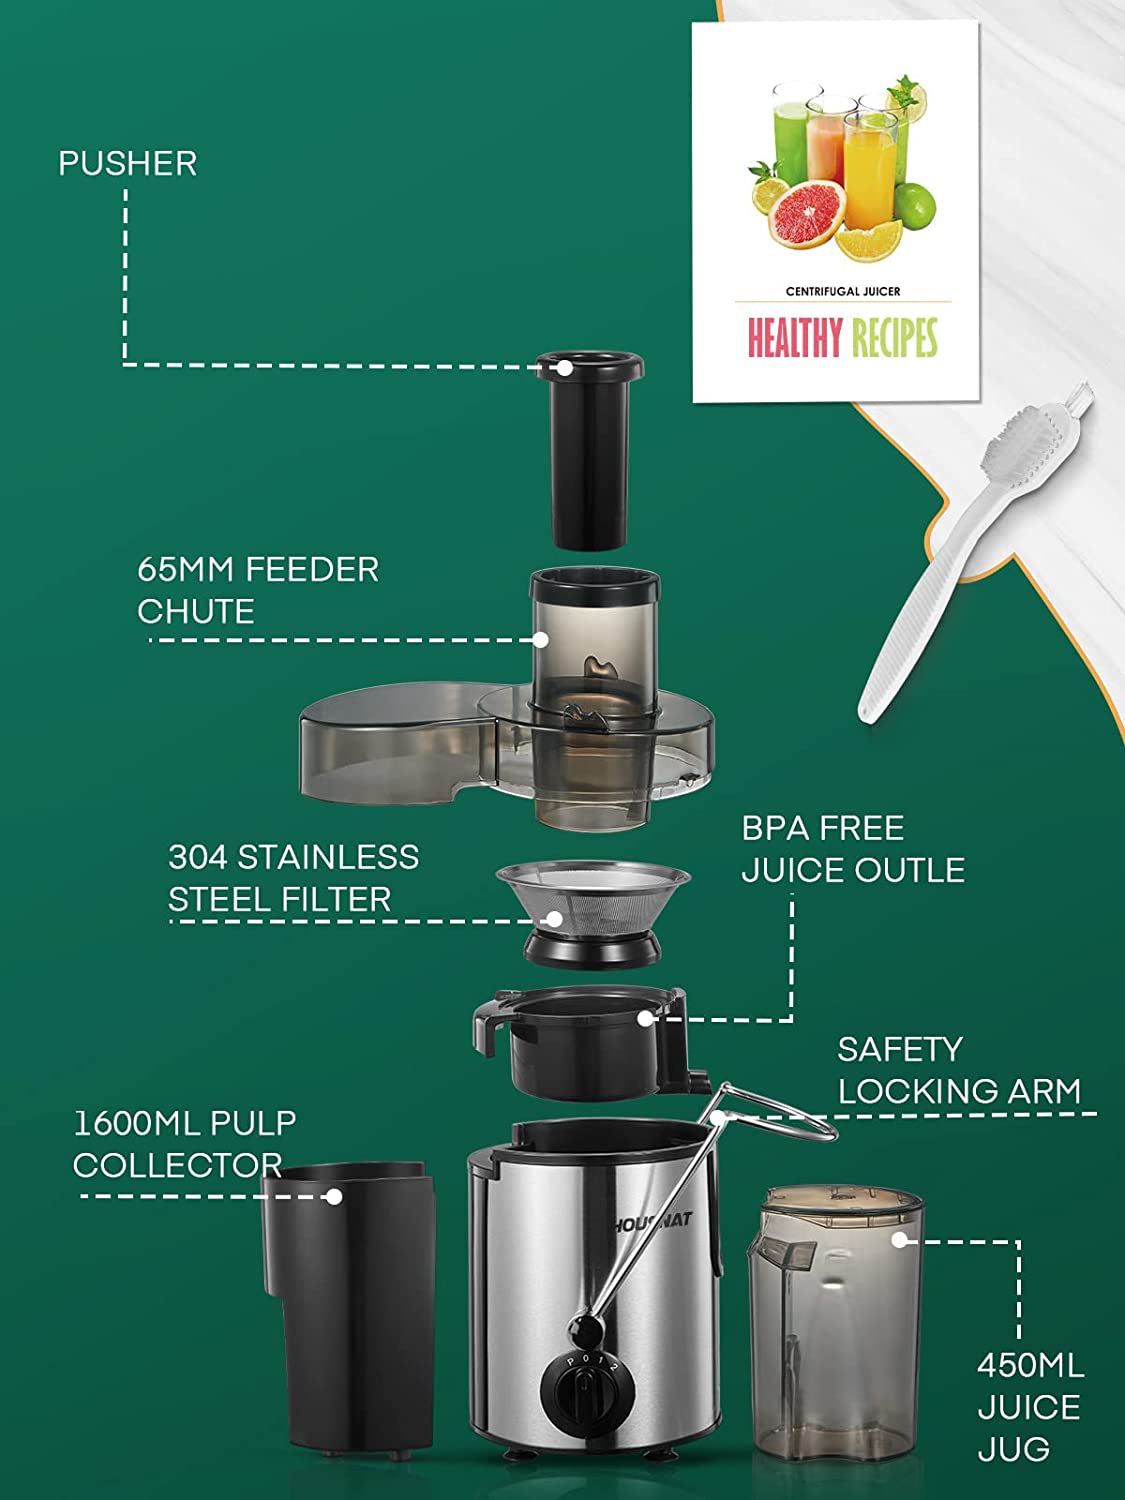 recipe and brush included, Juicer, HOUSNAT Juicer Machines Vegetable and Fruit with 3-Speed Setting, Upgraded Version 400W Motor Quick Juicing, Juicing Recipe Included